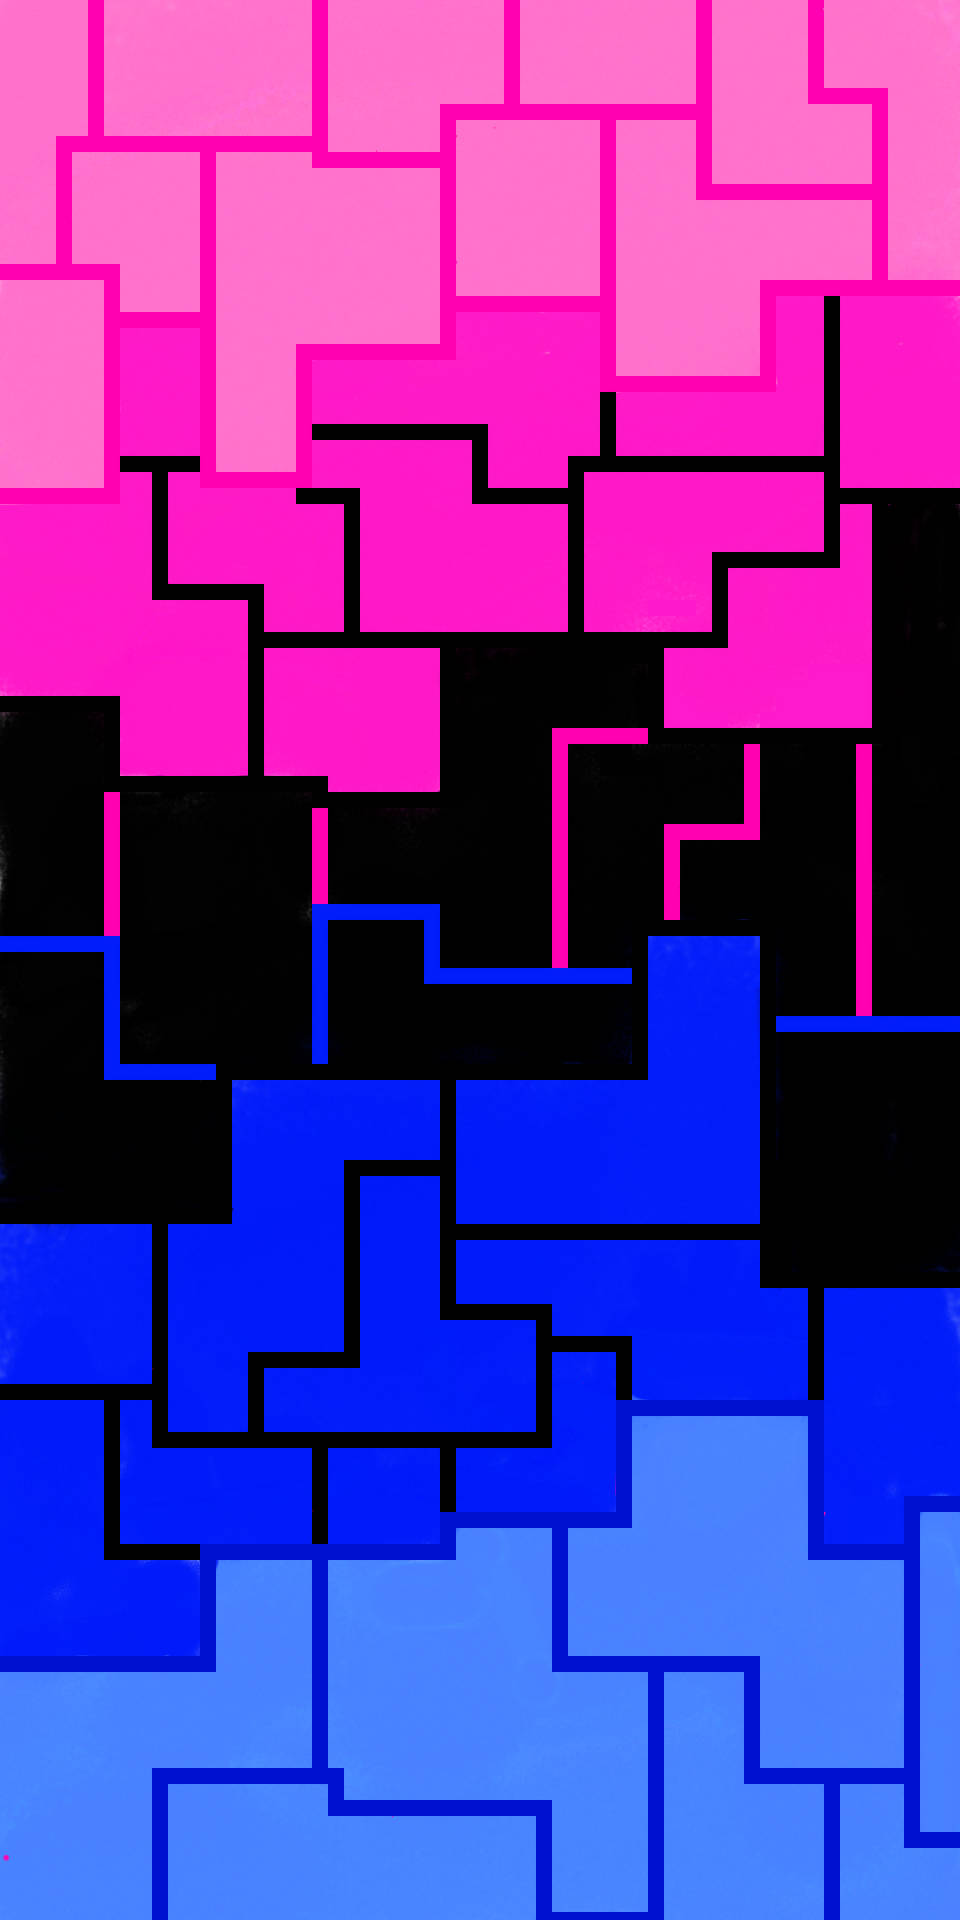 A Pink And Blue Tiled Pattern With A Blue Square Wallpaper